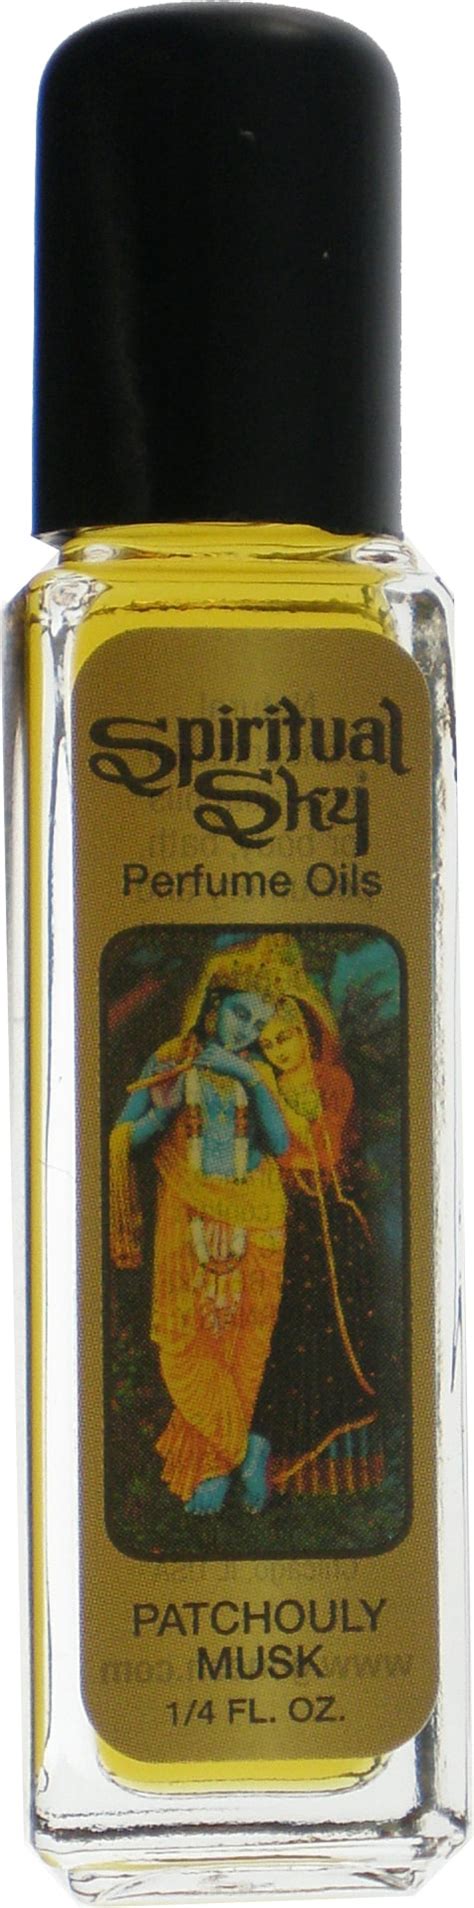 Buy Spiritual Sky Patchouli Musk Scented Perfume Oil Pack Of 4